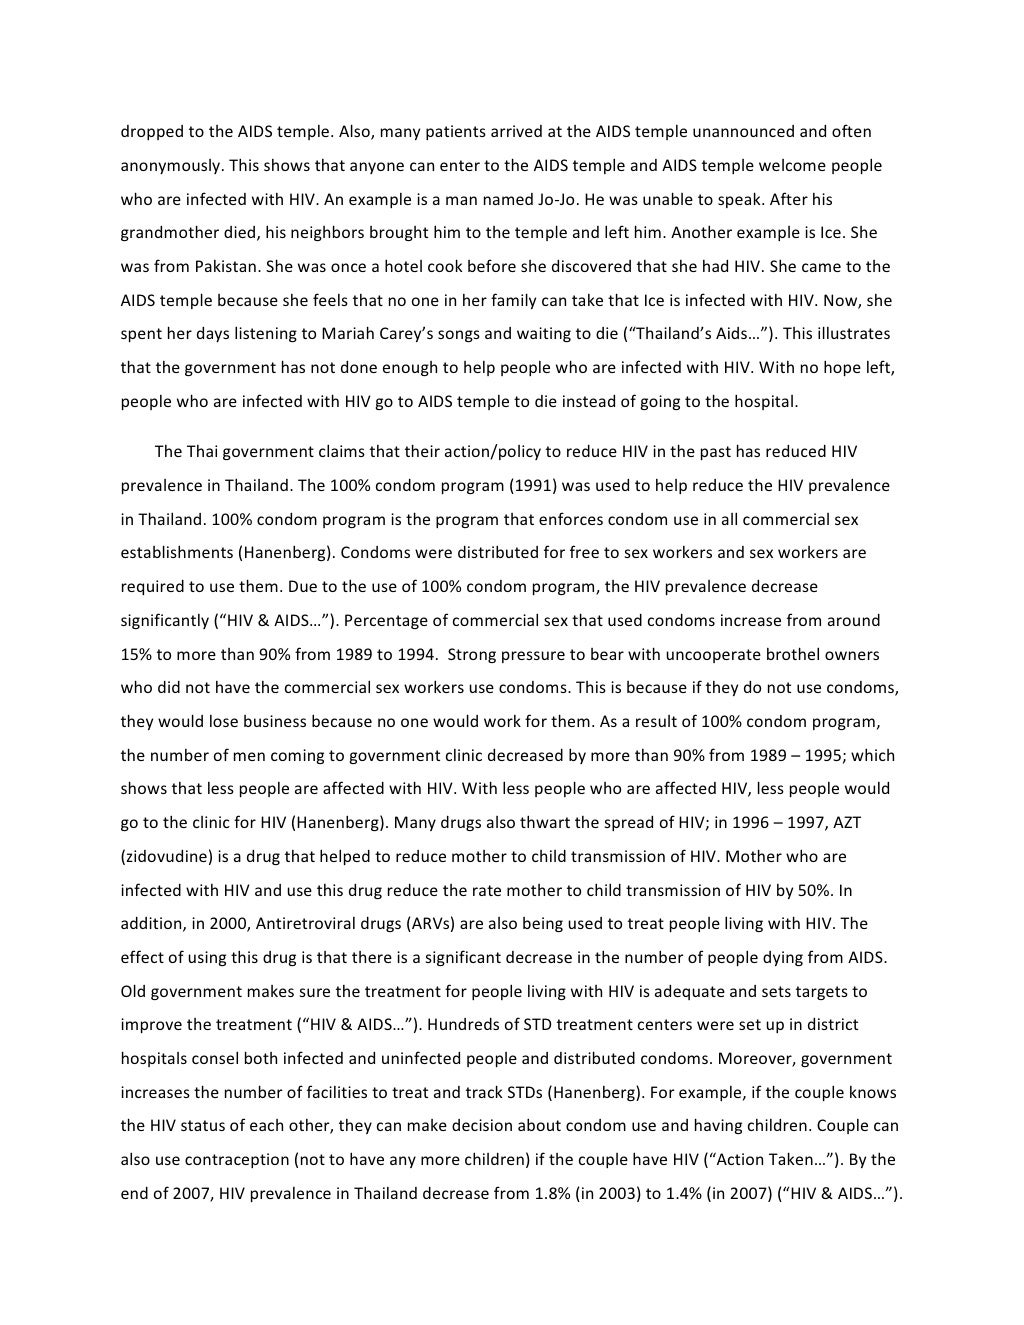 essay for hiv and aids